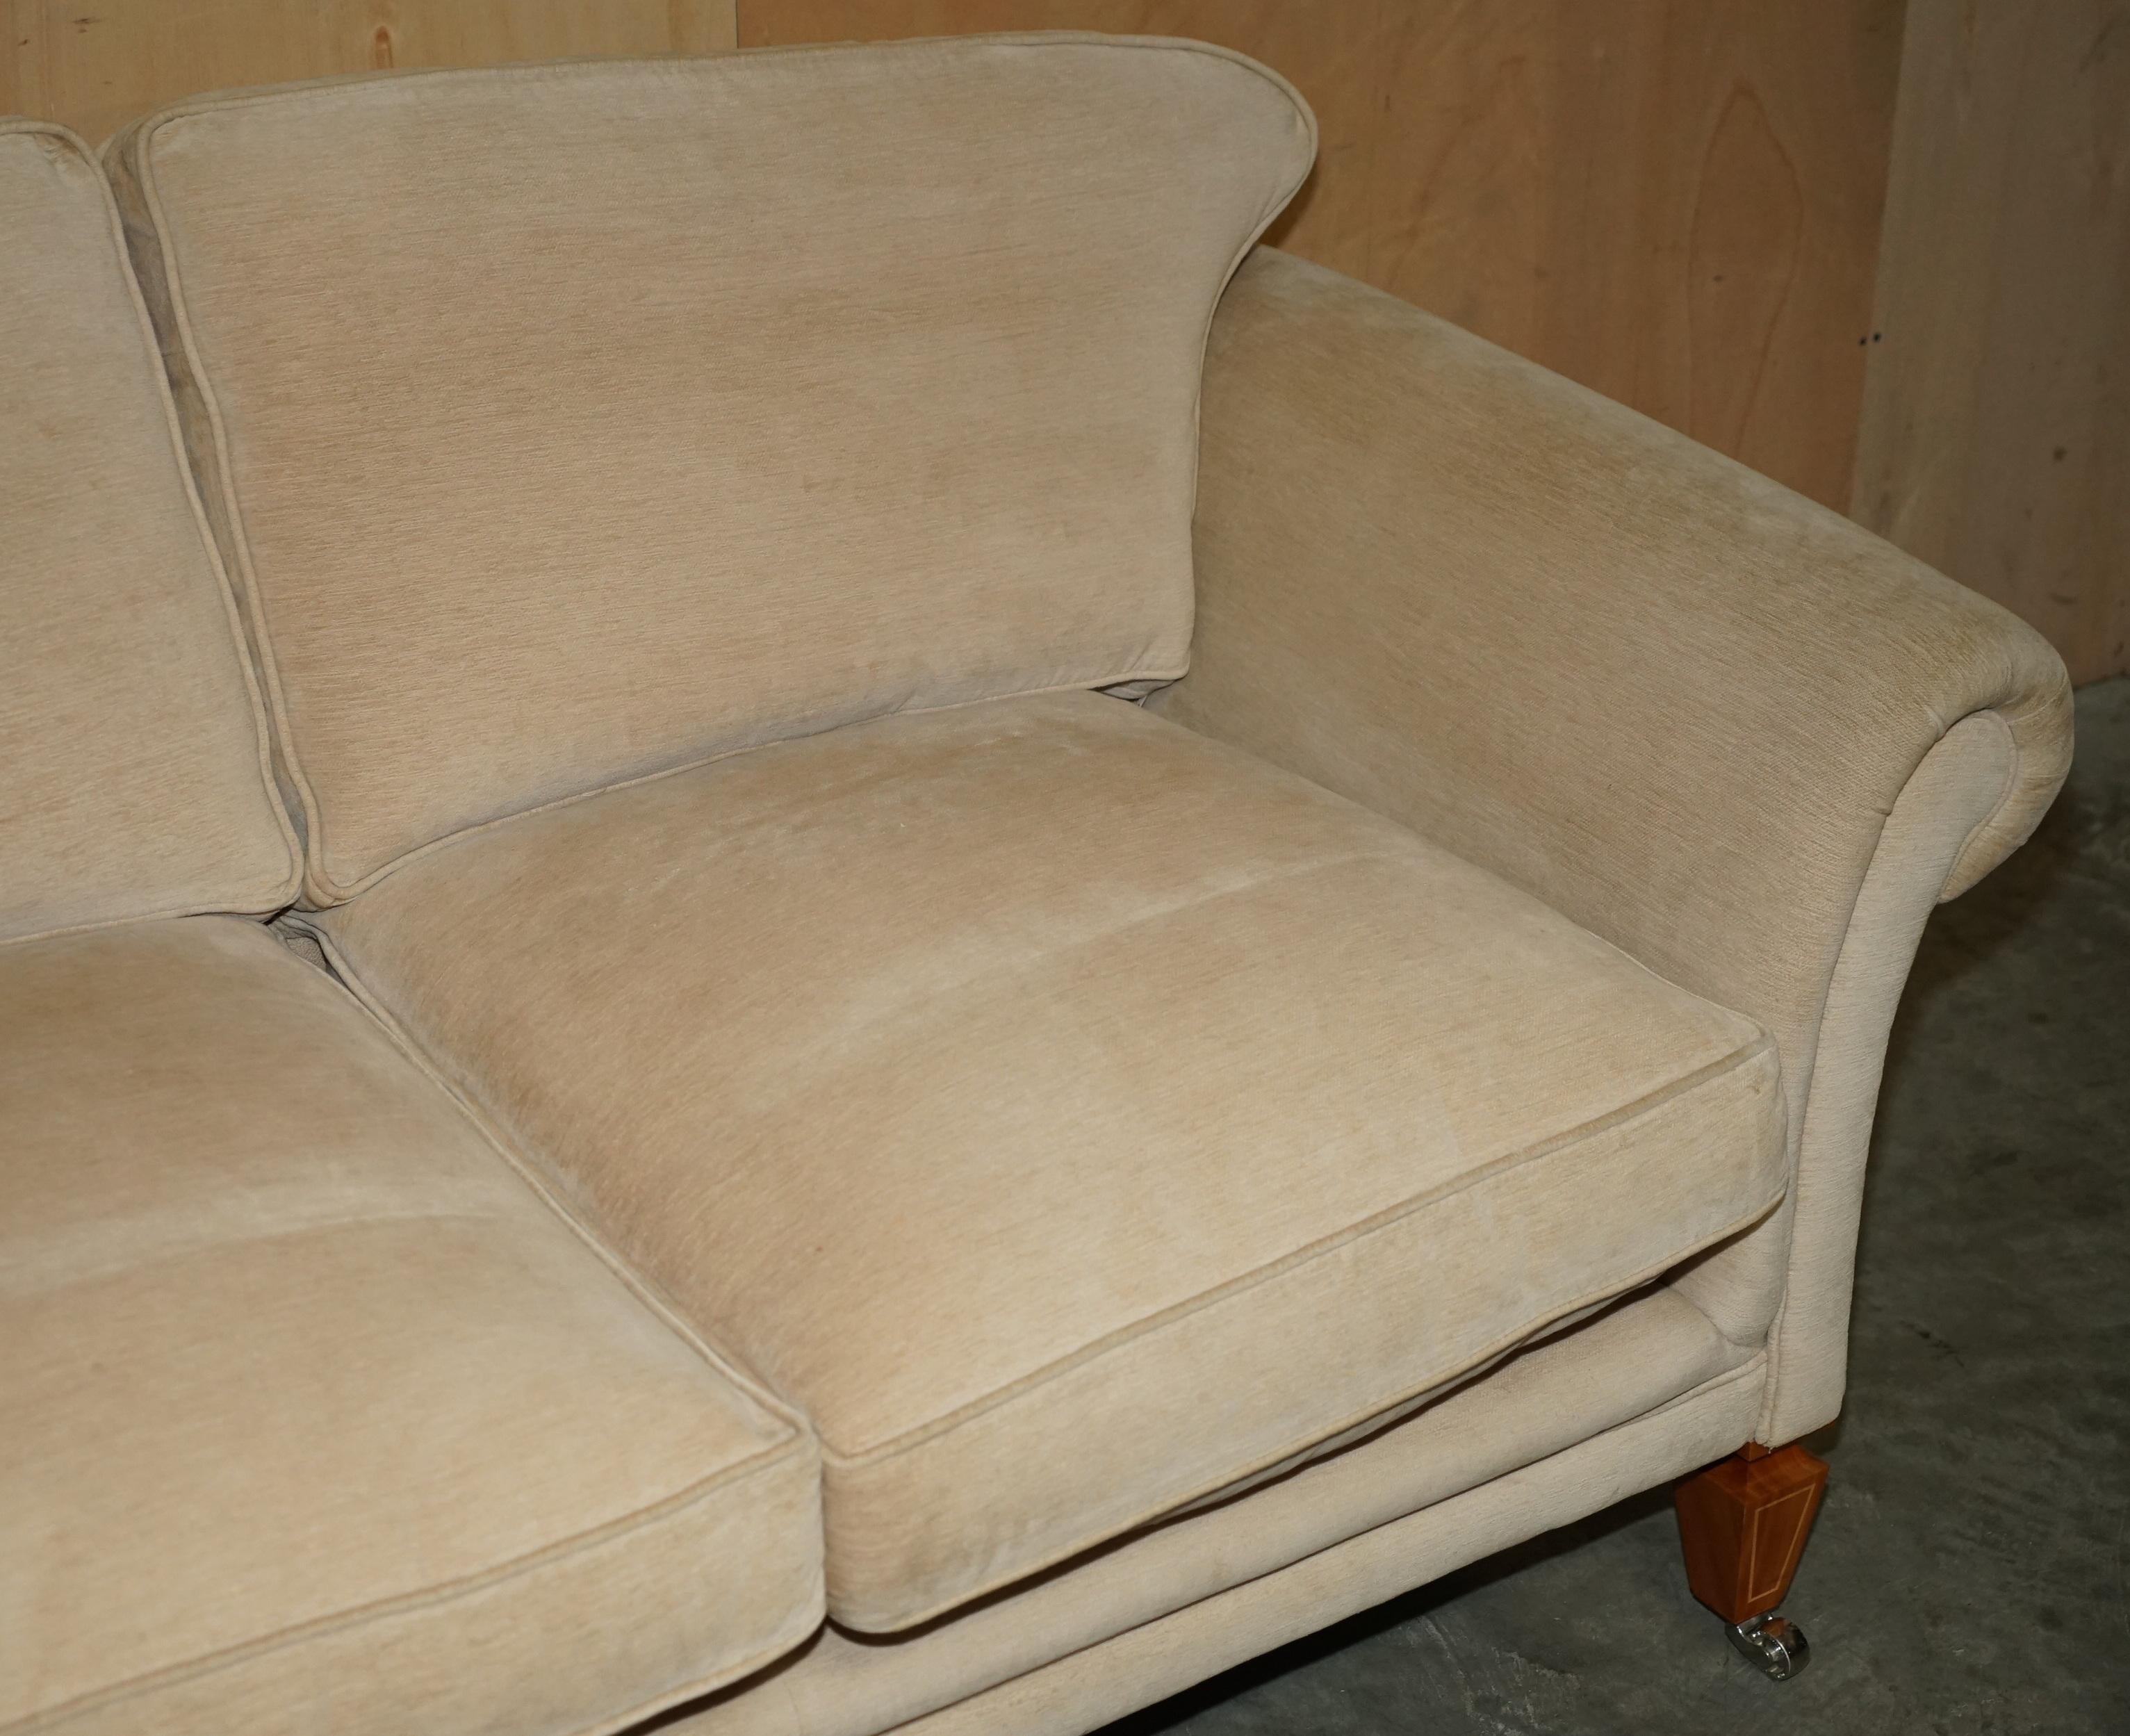 EXQUISITE VISCOUNT DAVID LINLEY TWO SEAT SOFA WiTH STAMPED CASTORS For Sale 4